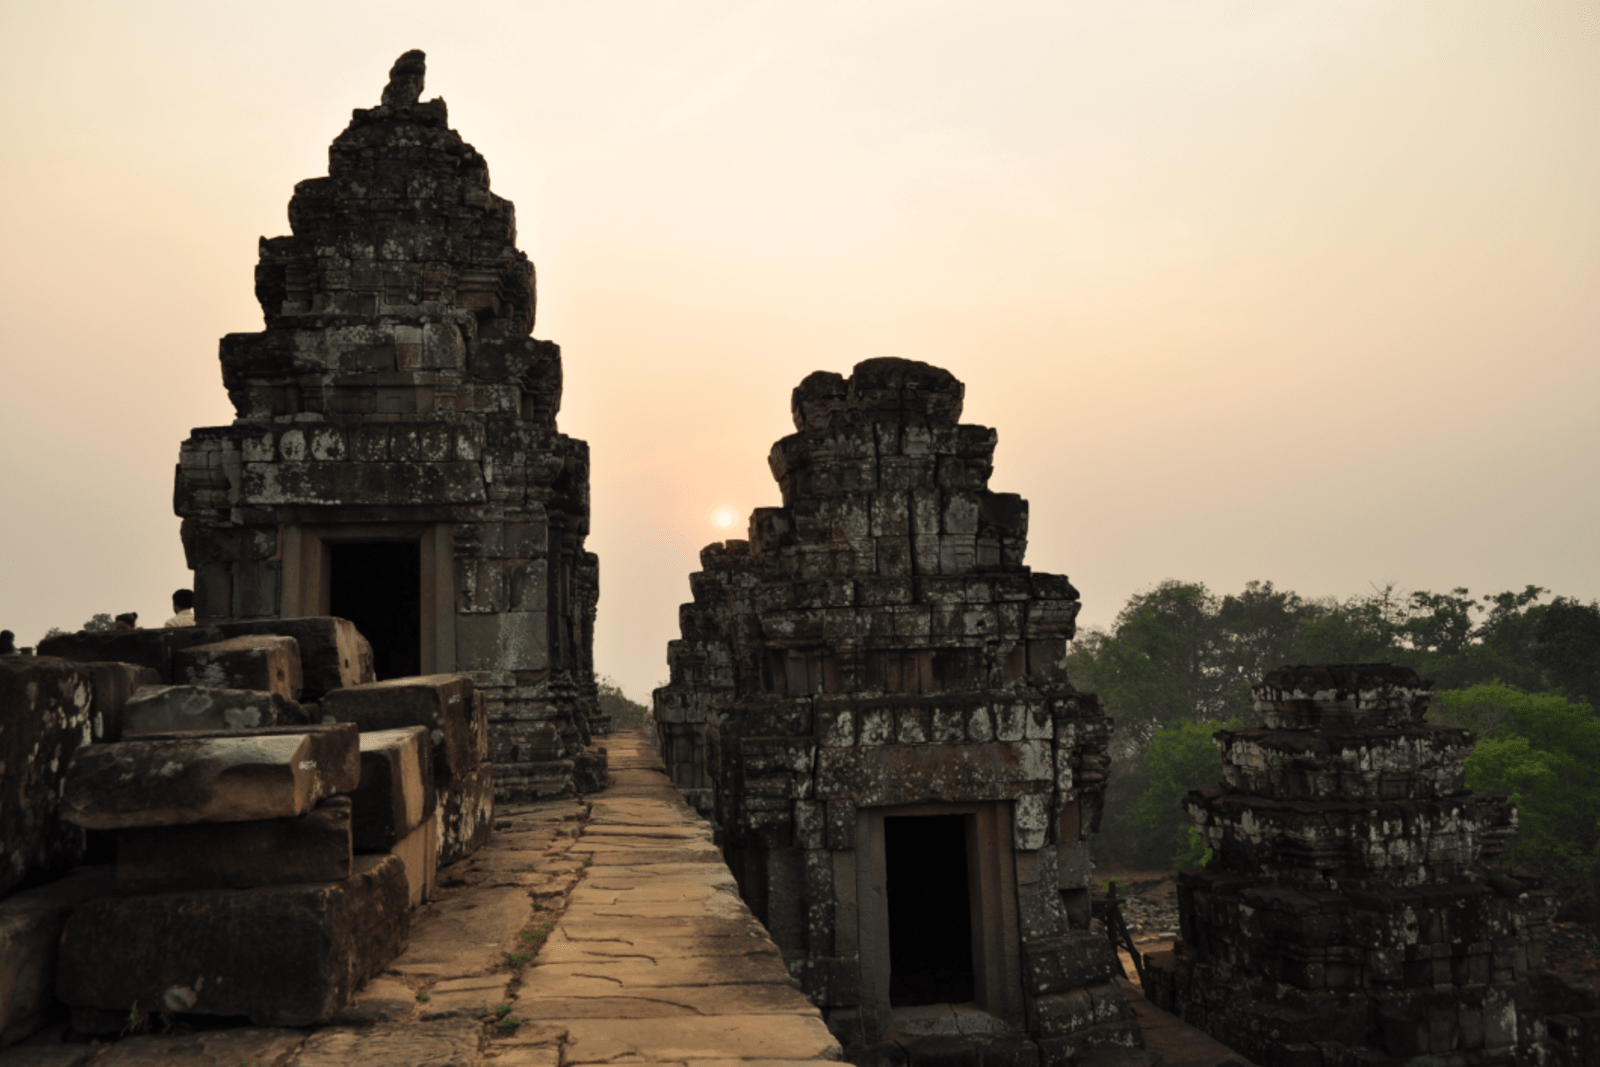 Angor Wat and Ta Prohm are incredible ancient wonders in Cambodia